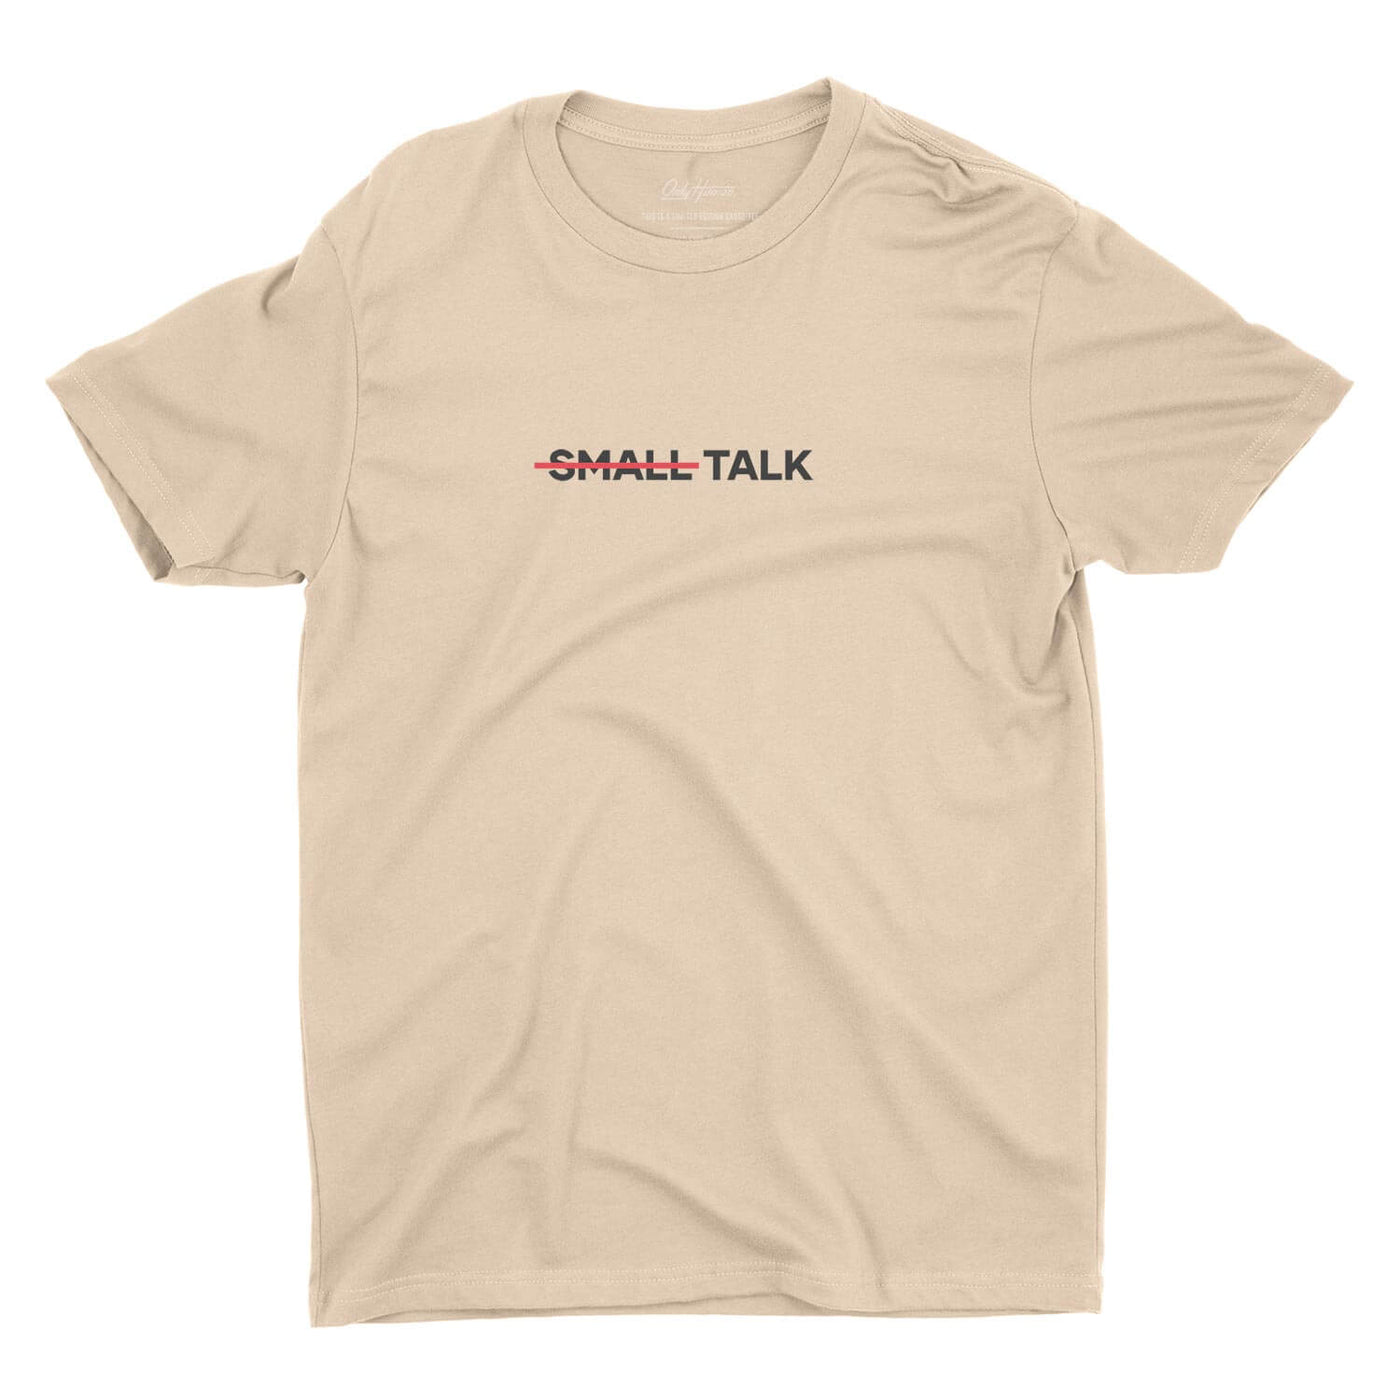 Small Talk tee - Only Human